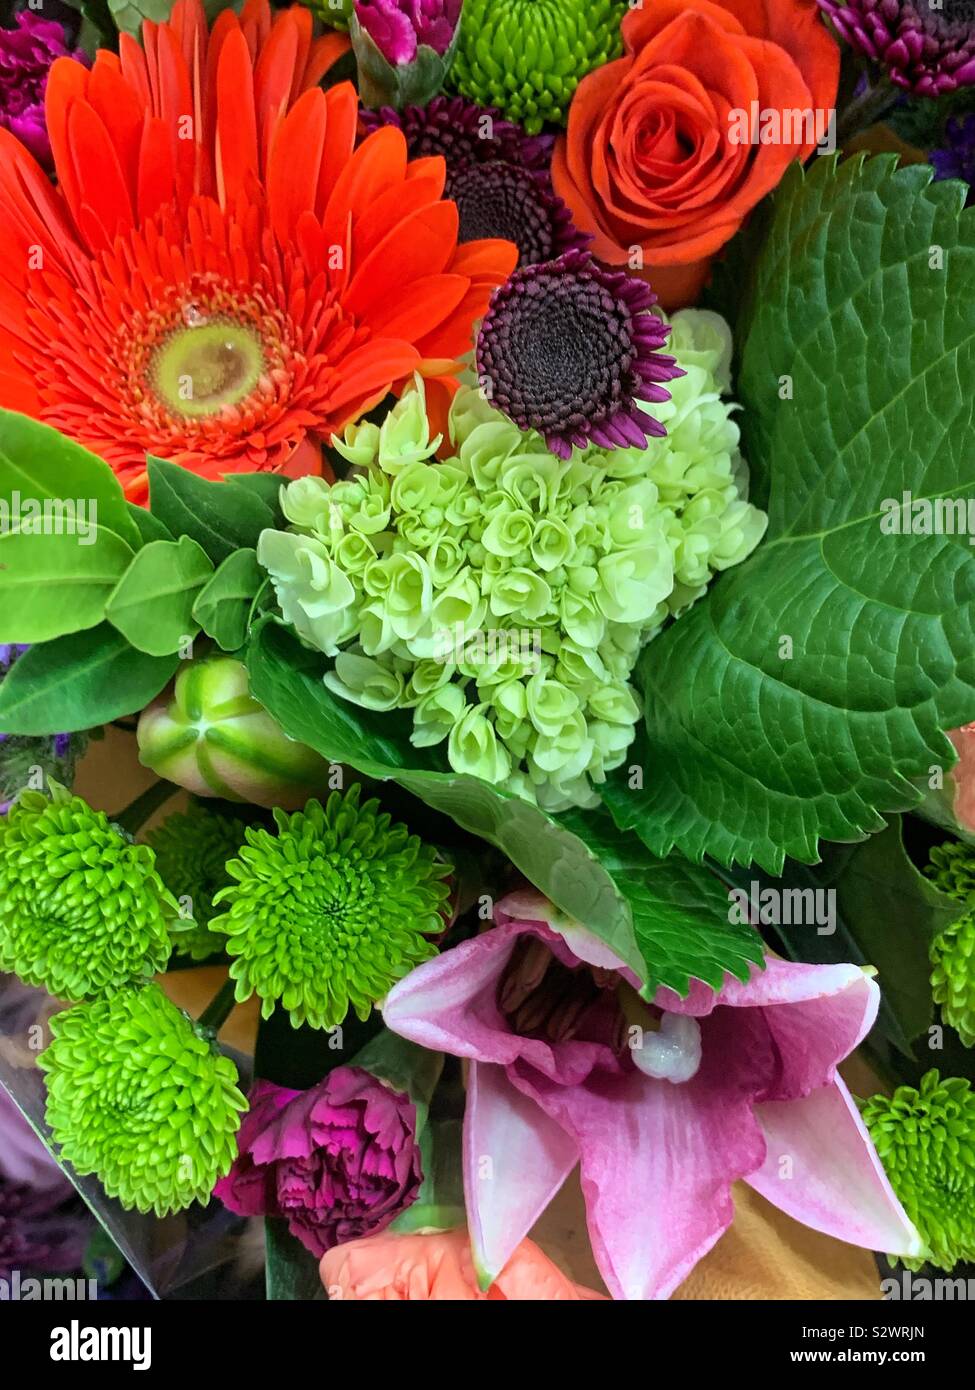 Beautiful green hydrangeas surrounded by red daisies and purple and green flora. Stock Photo